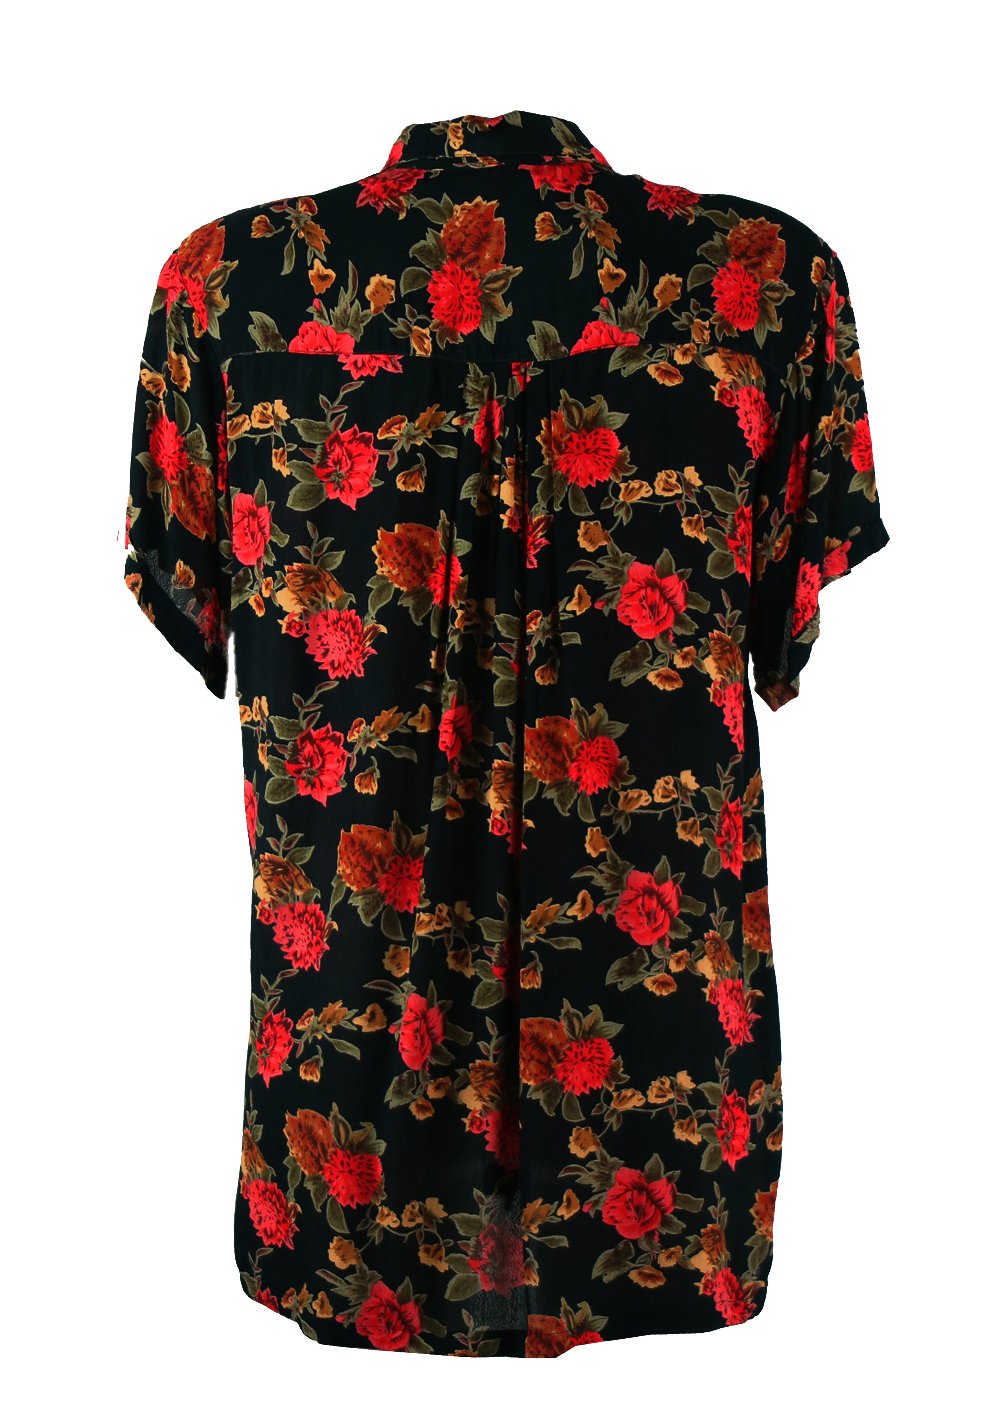 Semi-Sheer Oversize Black Short Sleeve Blouse with Red Rose Print - M/L ...